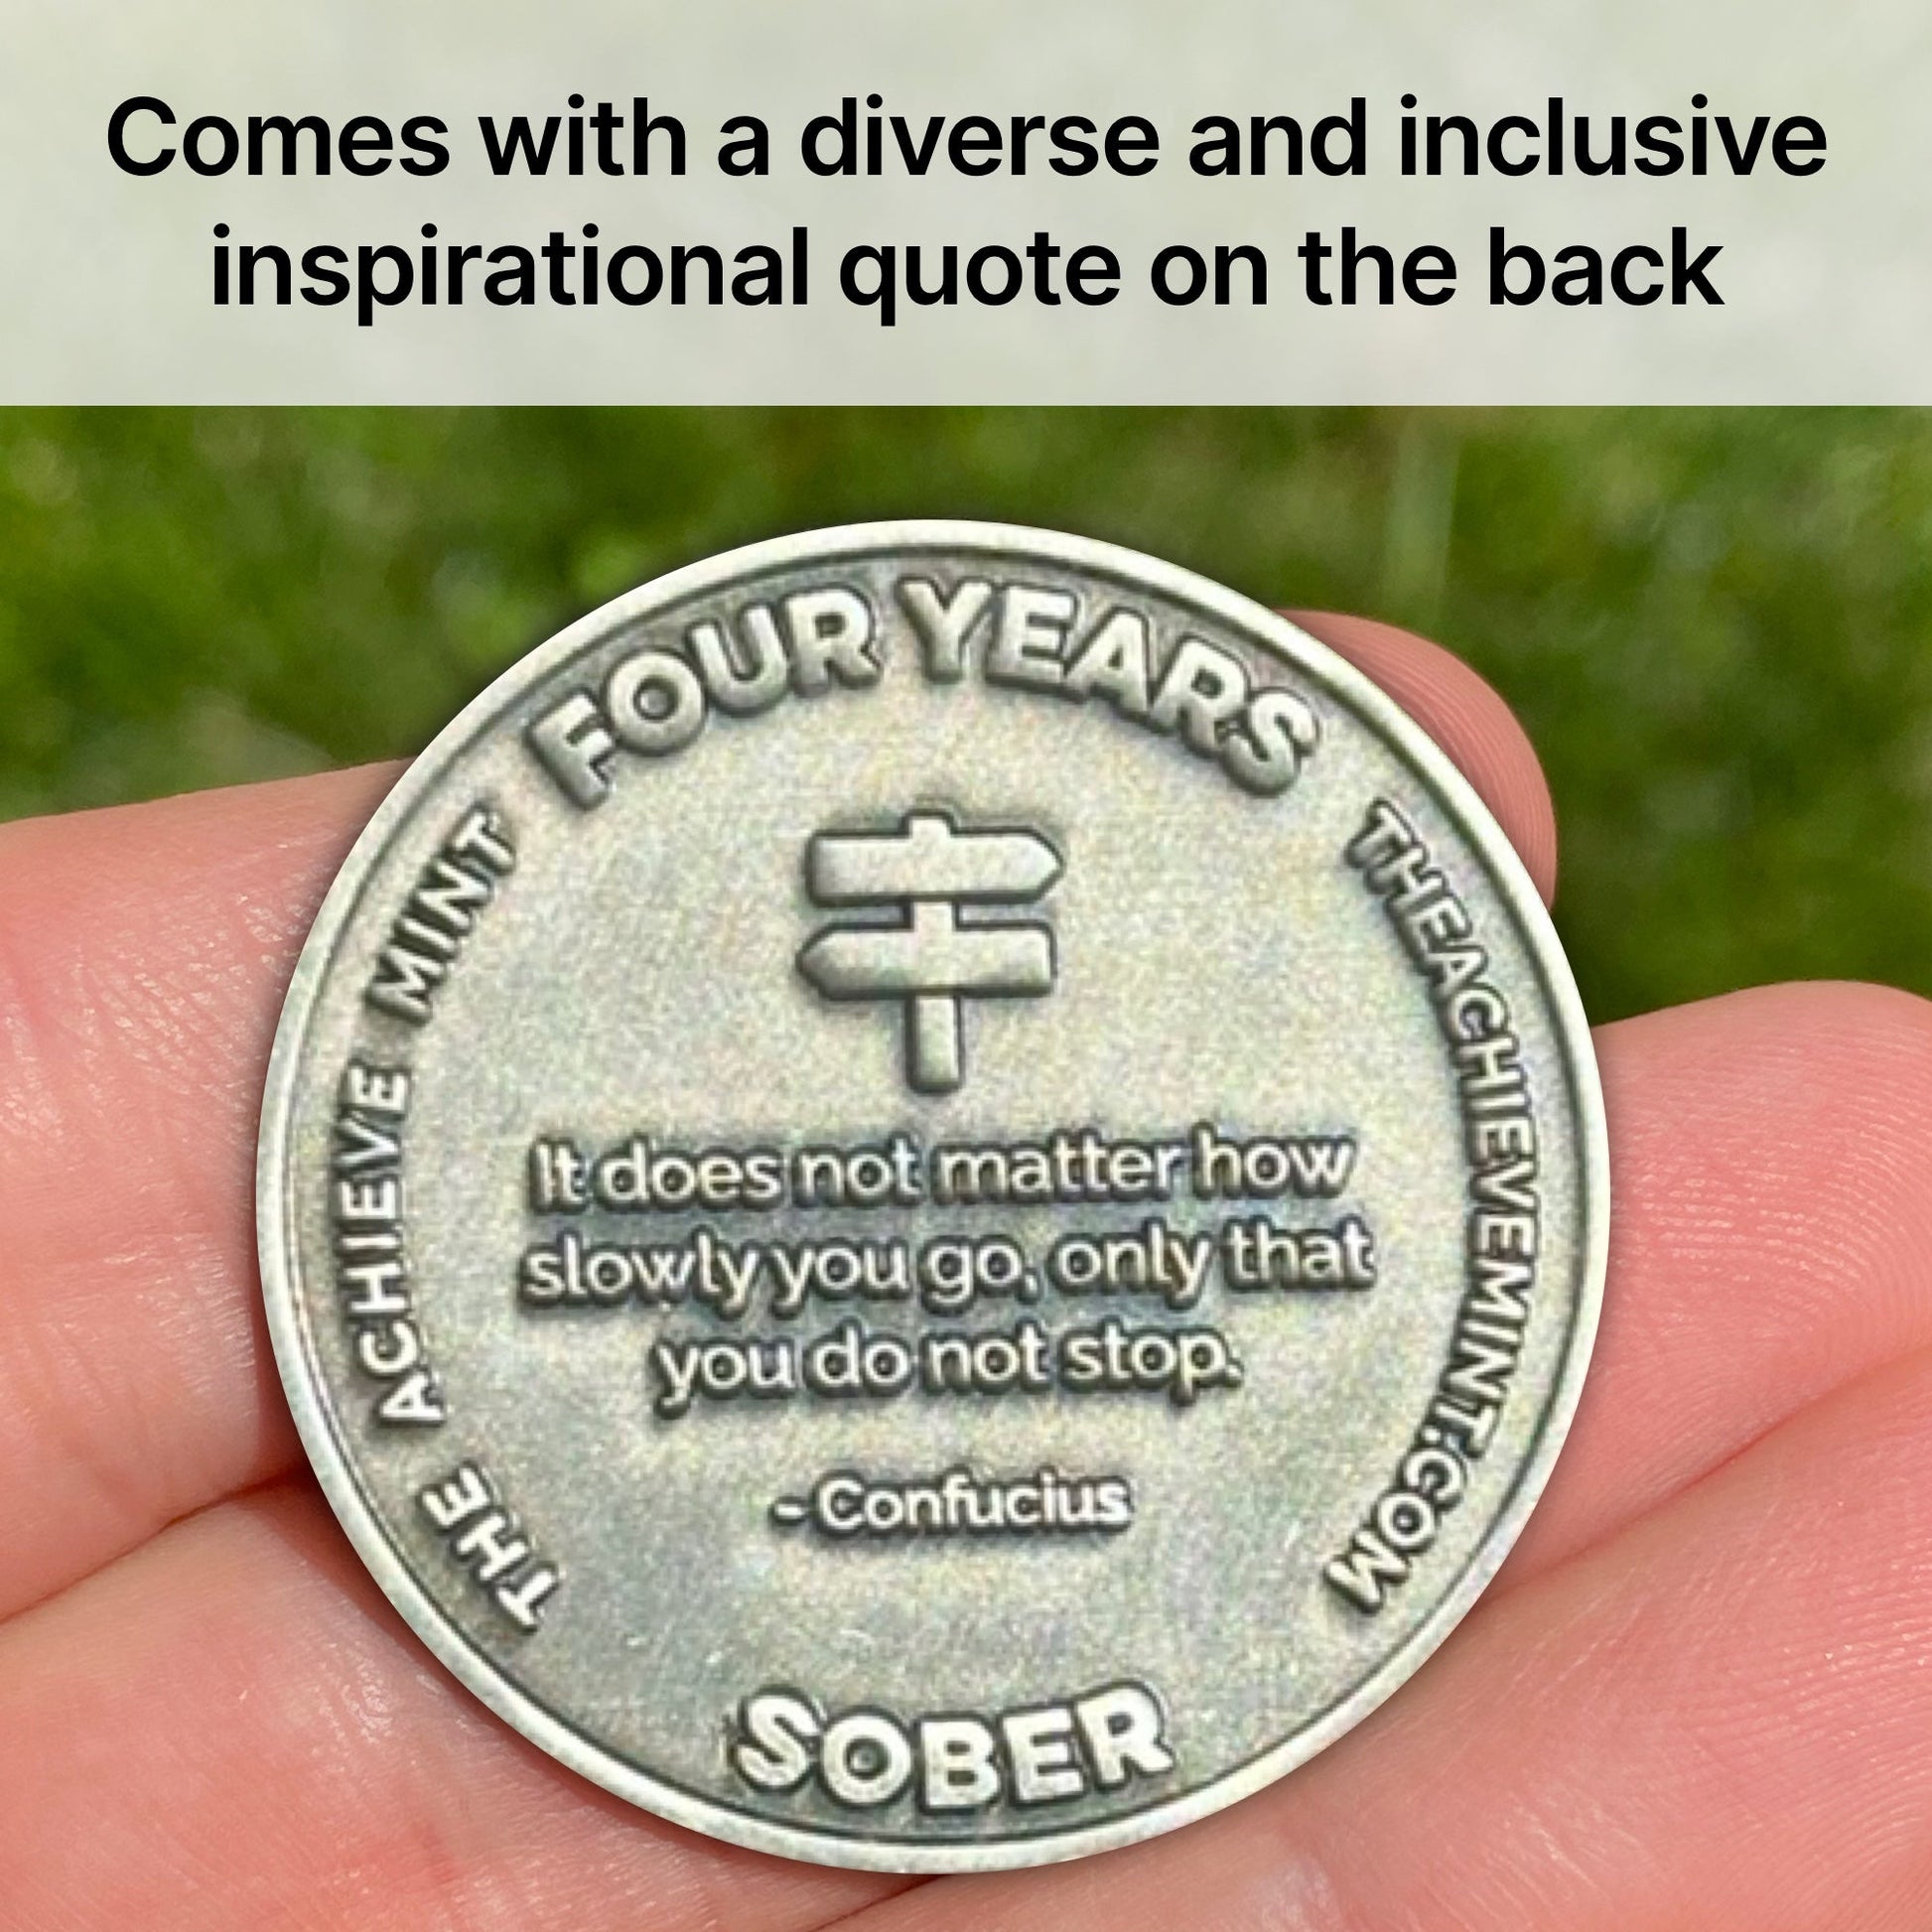 Four Years Sober sobriety coin - The Achieve Mint